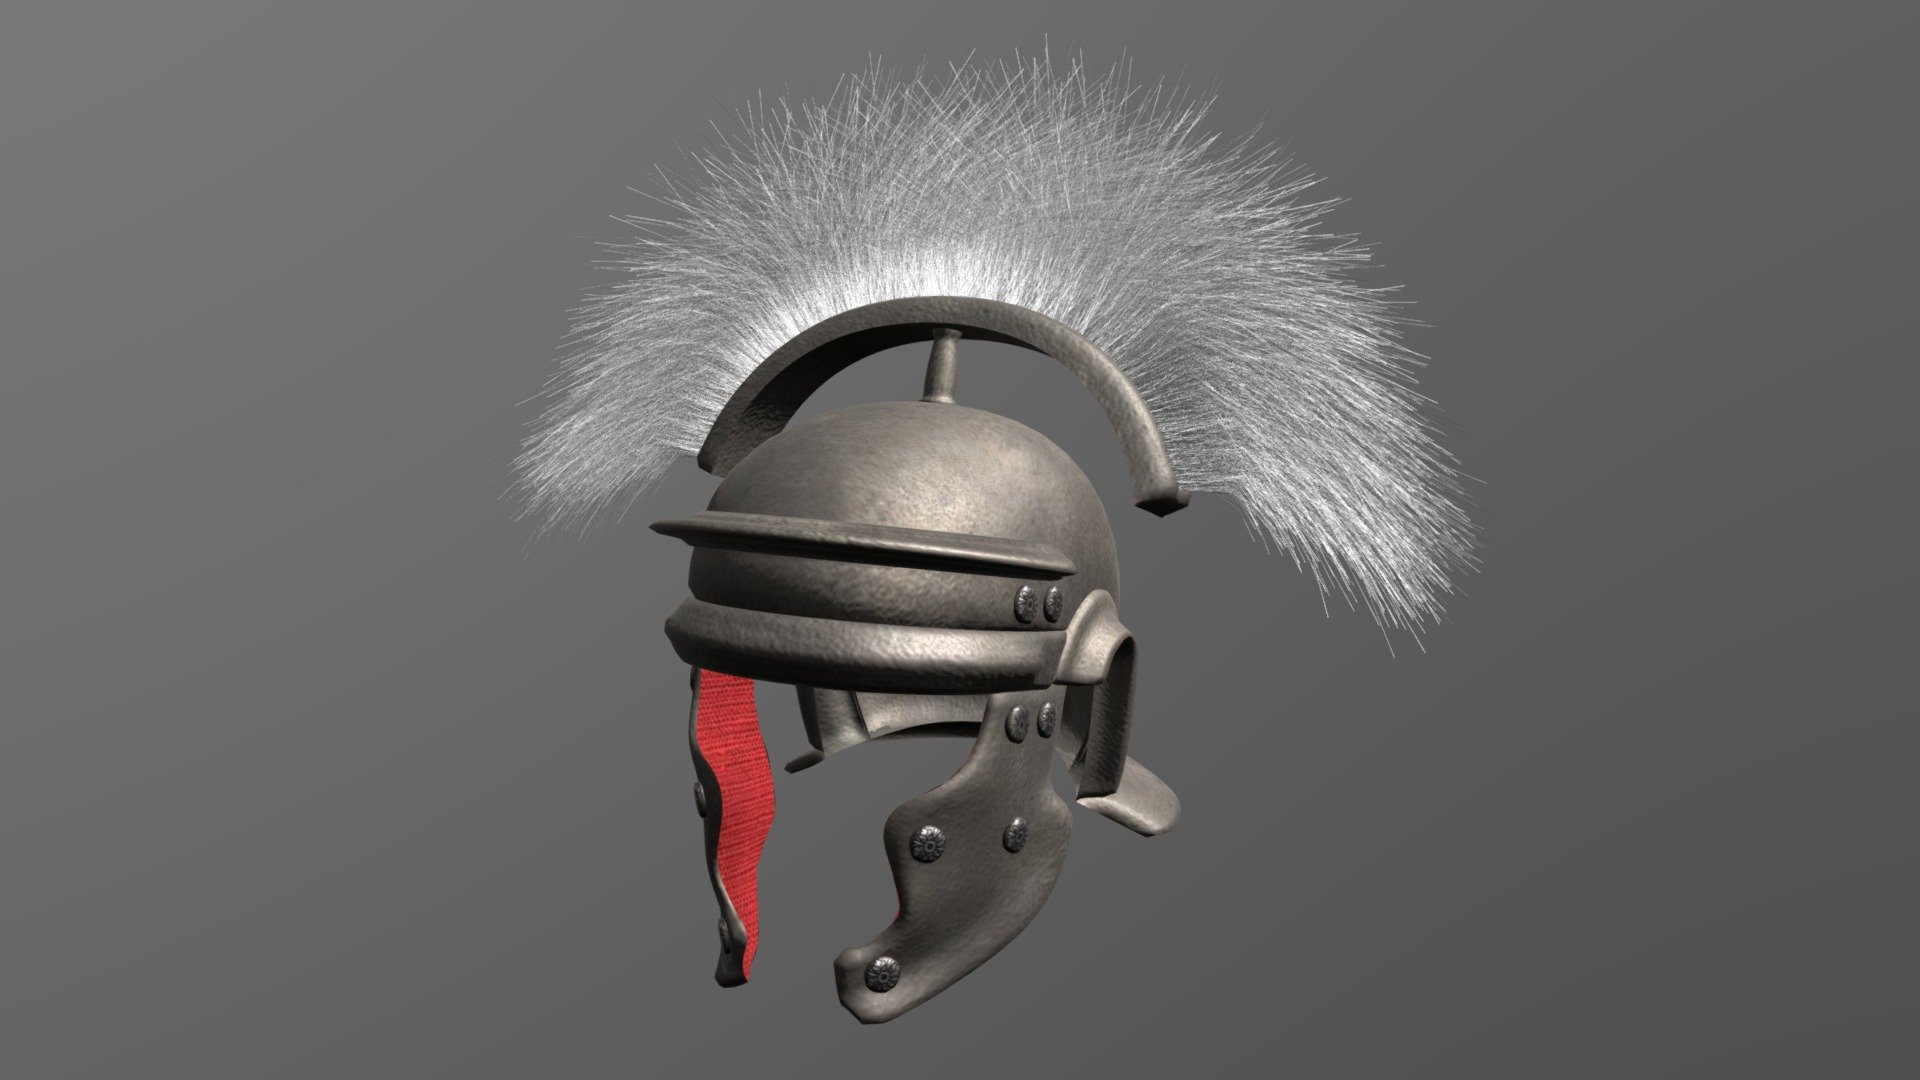 A galea was a Roman soldier's helmet. Some gladiators, specifically myrmillones, also wore bronze galeae with face masks and decorations, often a fish on its crest. The exact form or design of the helmet varied significantly over time, between differing unit types, and also between individual examples – pre-industrial production was by hand – so it is not certain to what degree there was any standardization even under the Roman Empire. Originally, Roman helmets were influenced by the neighboring Etruscans, people who utilised the &ldquo;Nasua